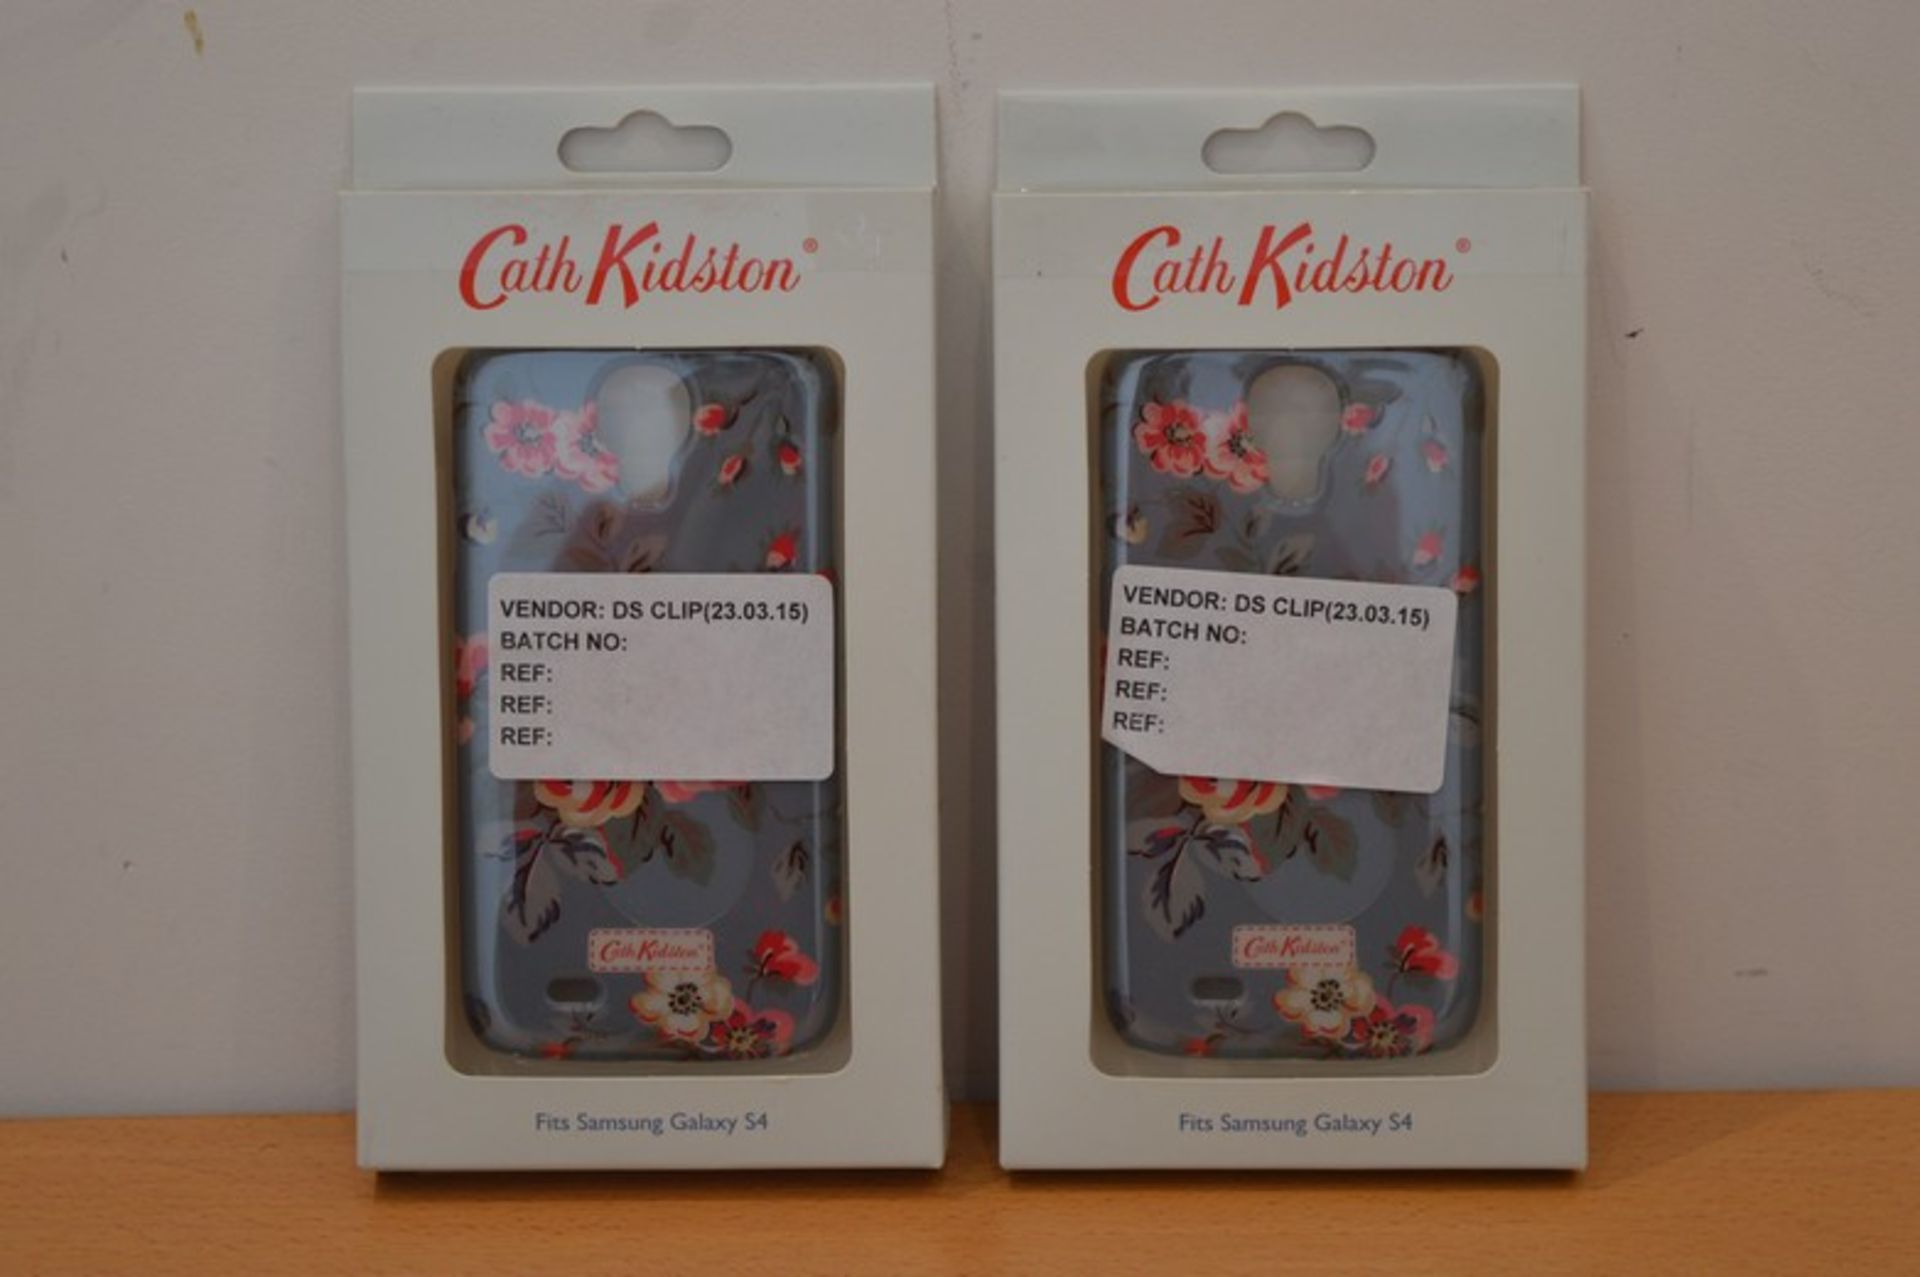 3X BRAND NEW CATH KIDSTON FLORAL SAMSUNG GALAXY S4 CASES RRP £25 EACH (DSCLIP)(23.03.15)